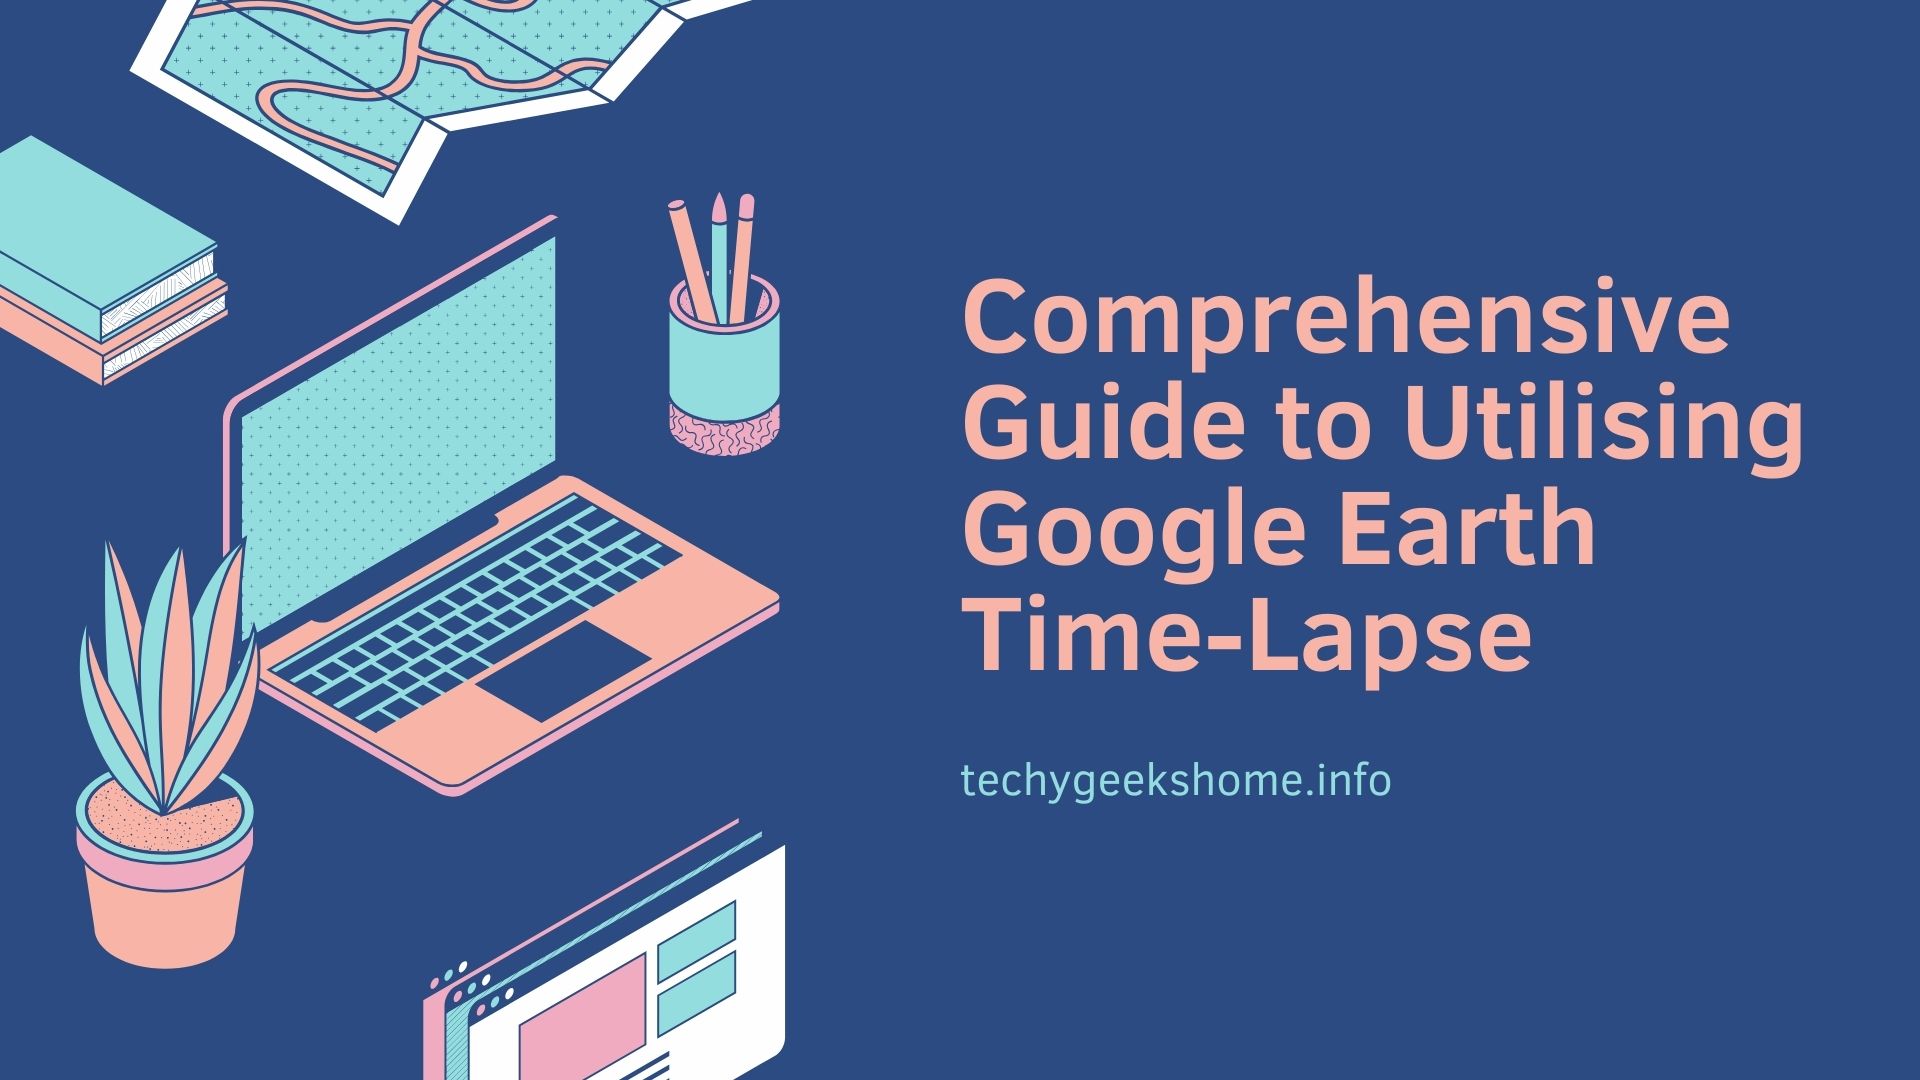 Exploring the World: A Comprehensive Guide to Utilising Google Earth Time-Lapse